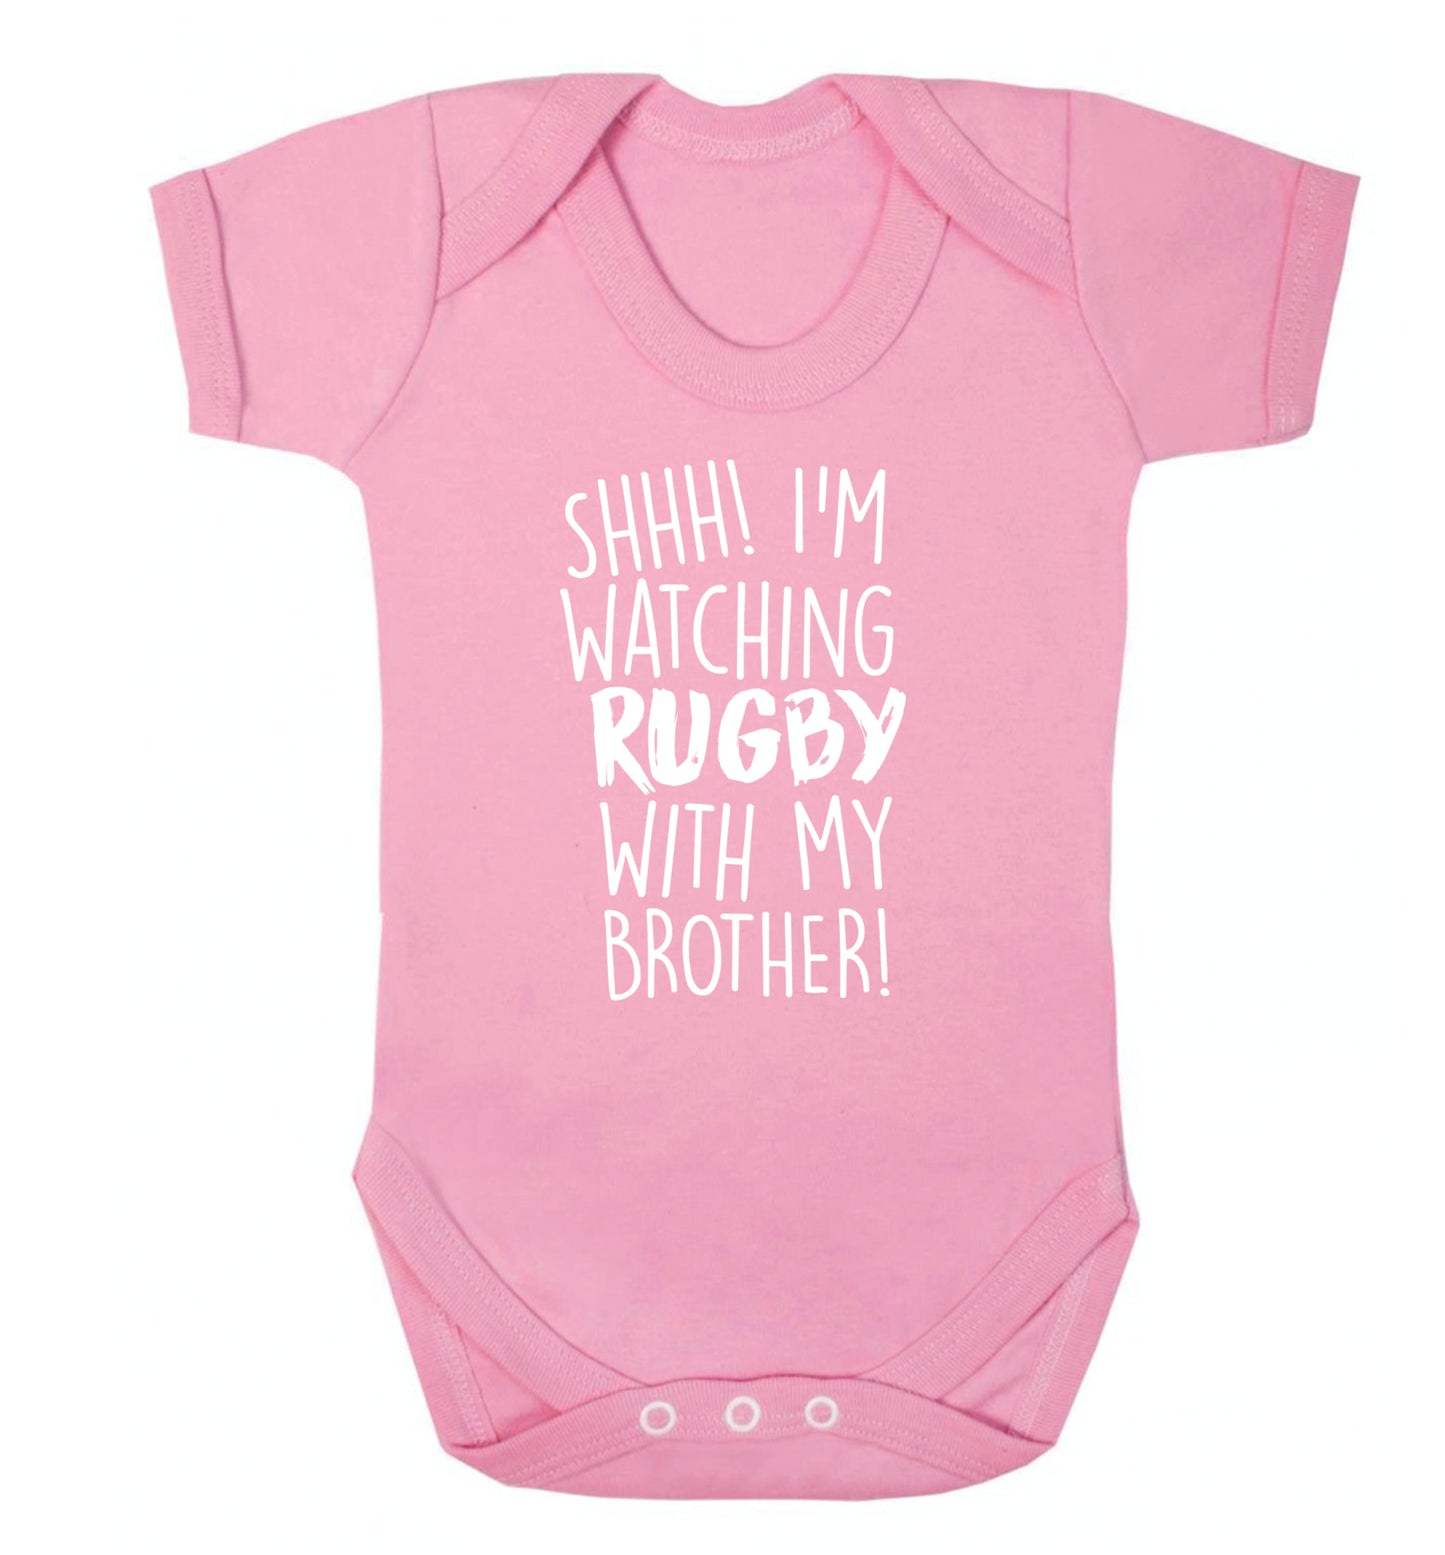 Shh... I'm watching rugby with my brother Baby Vest pale pink 18-24 months